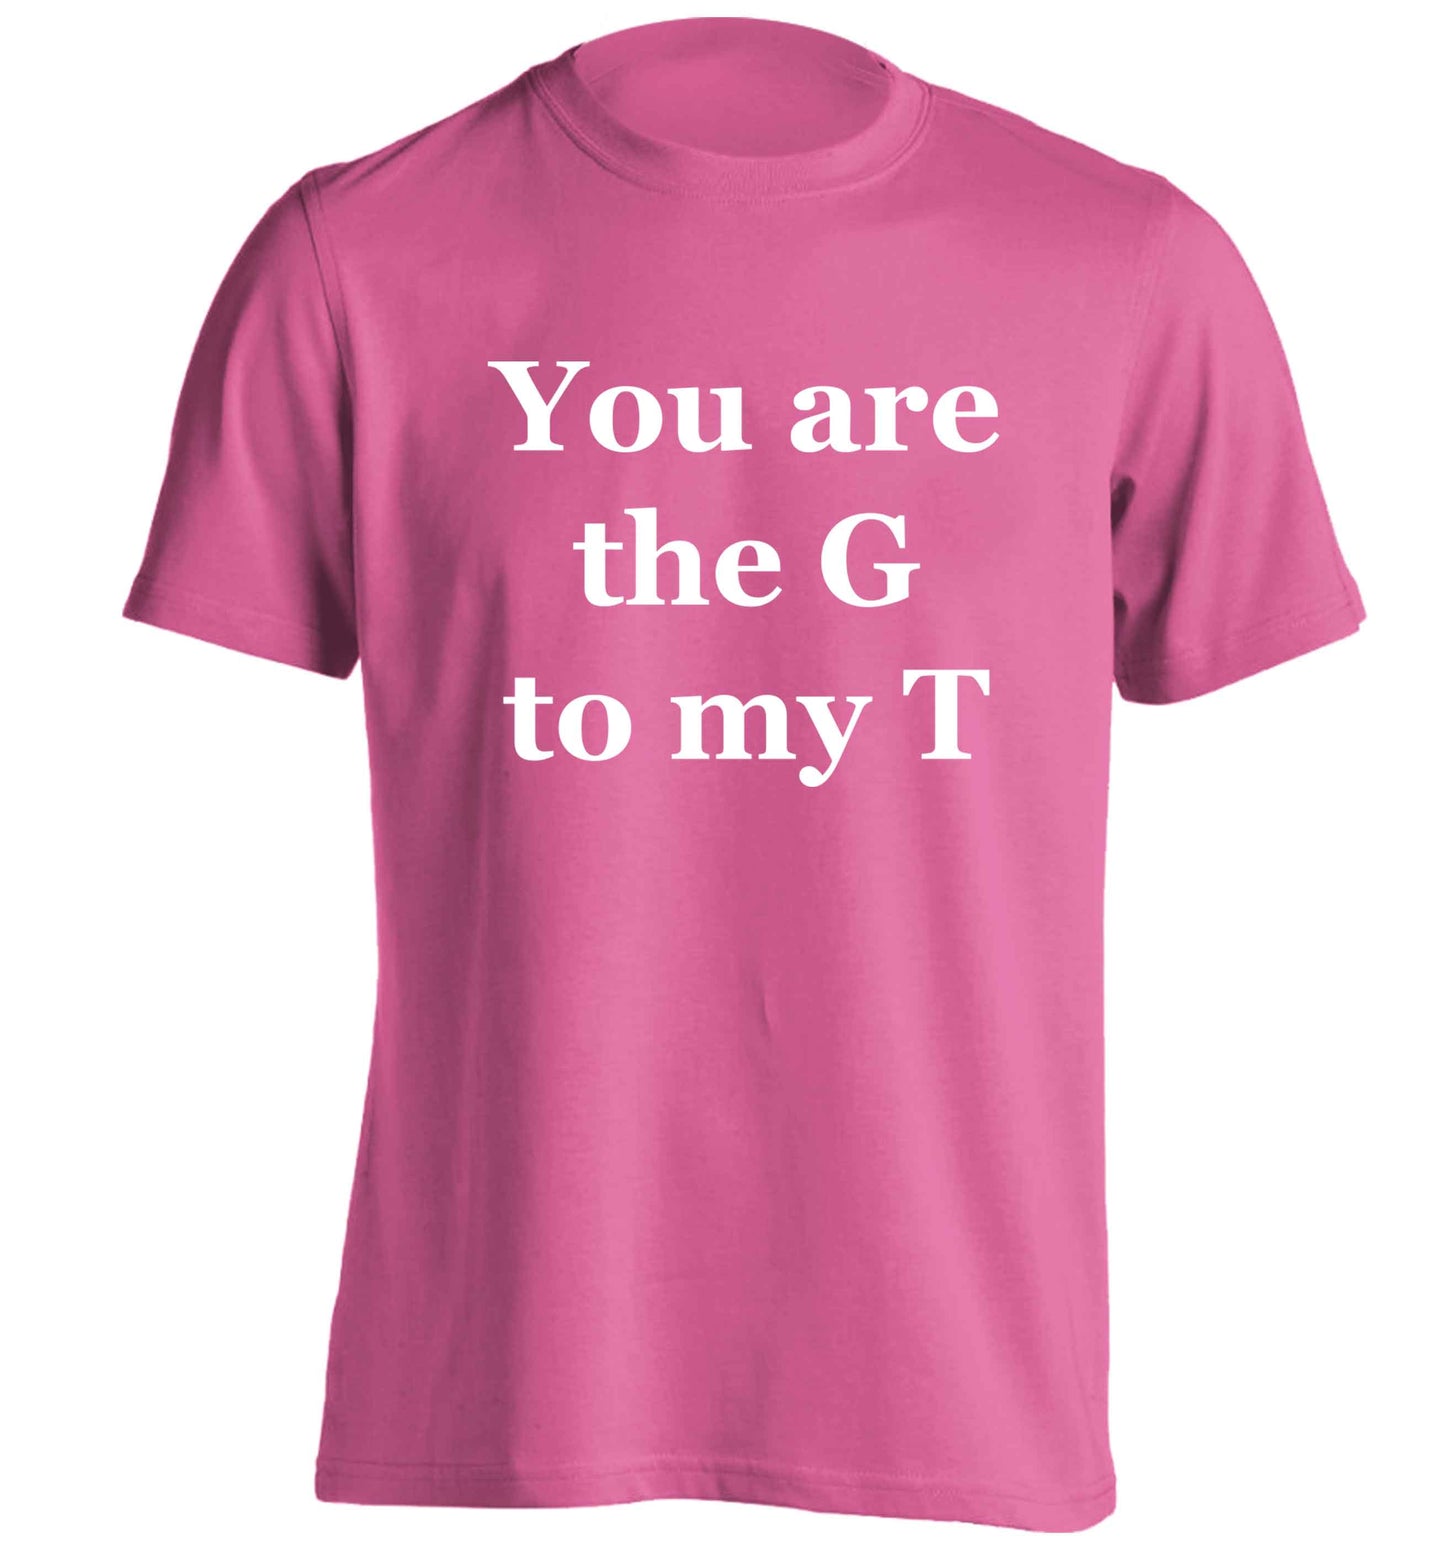 You are the G to my T adults unisex pink Tshirt 2XL